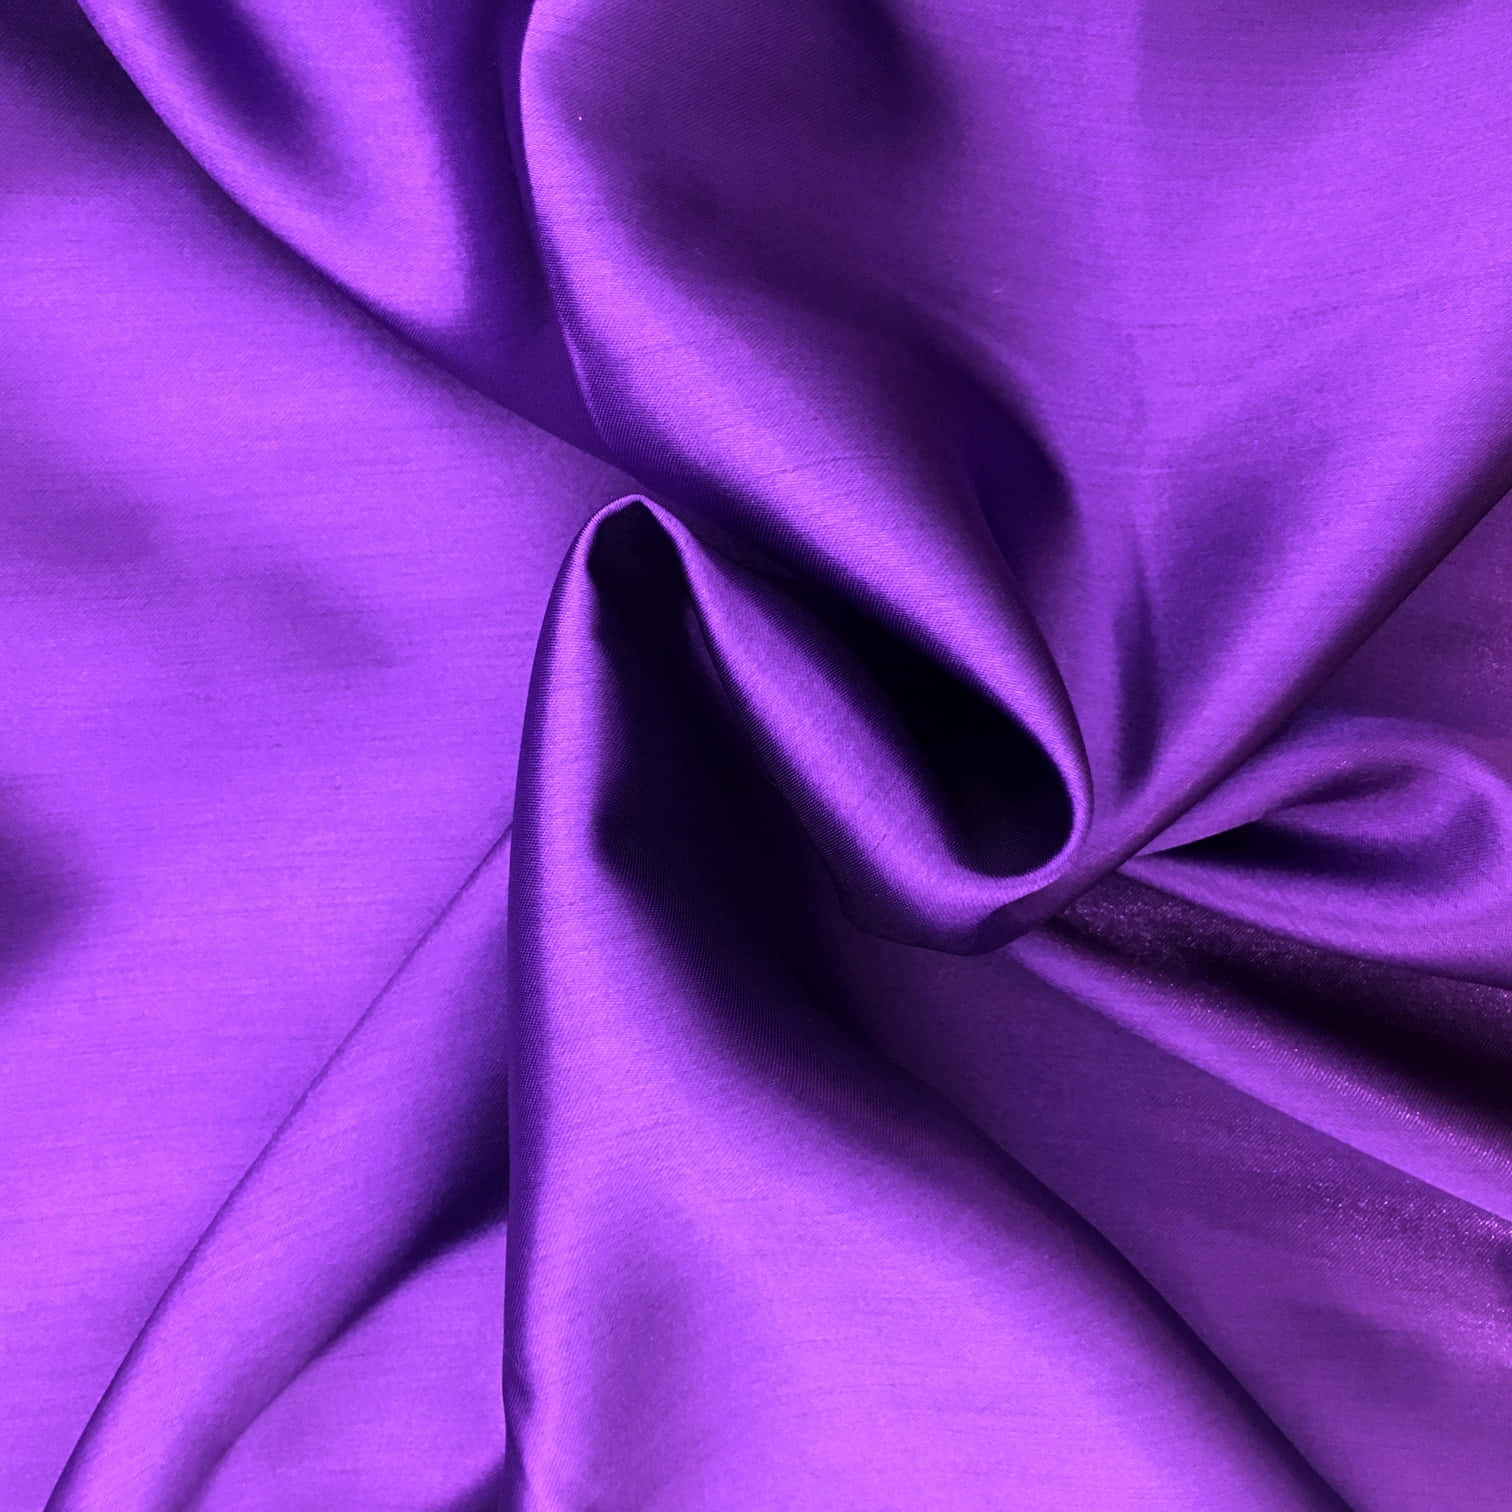 A luxuriously soft purple fabric perfect for upholstery and home decor. Wallpaper